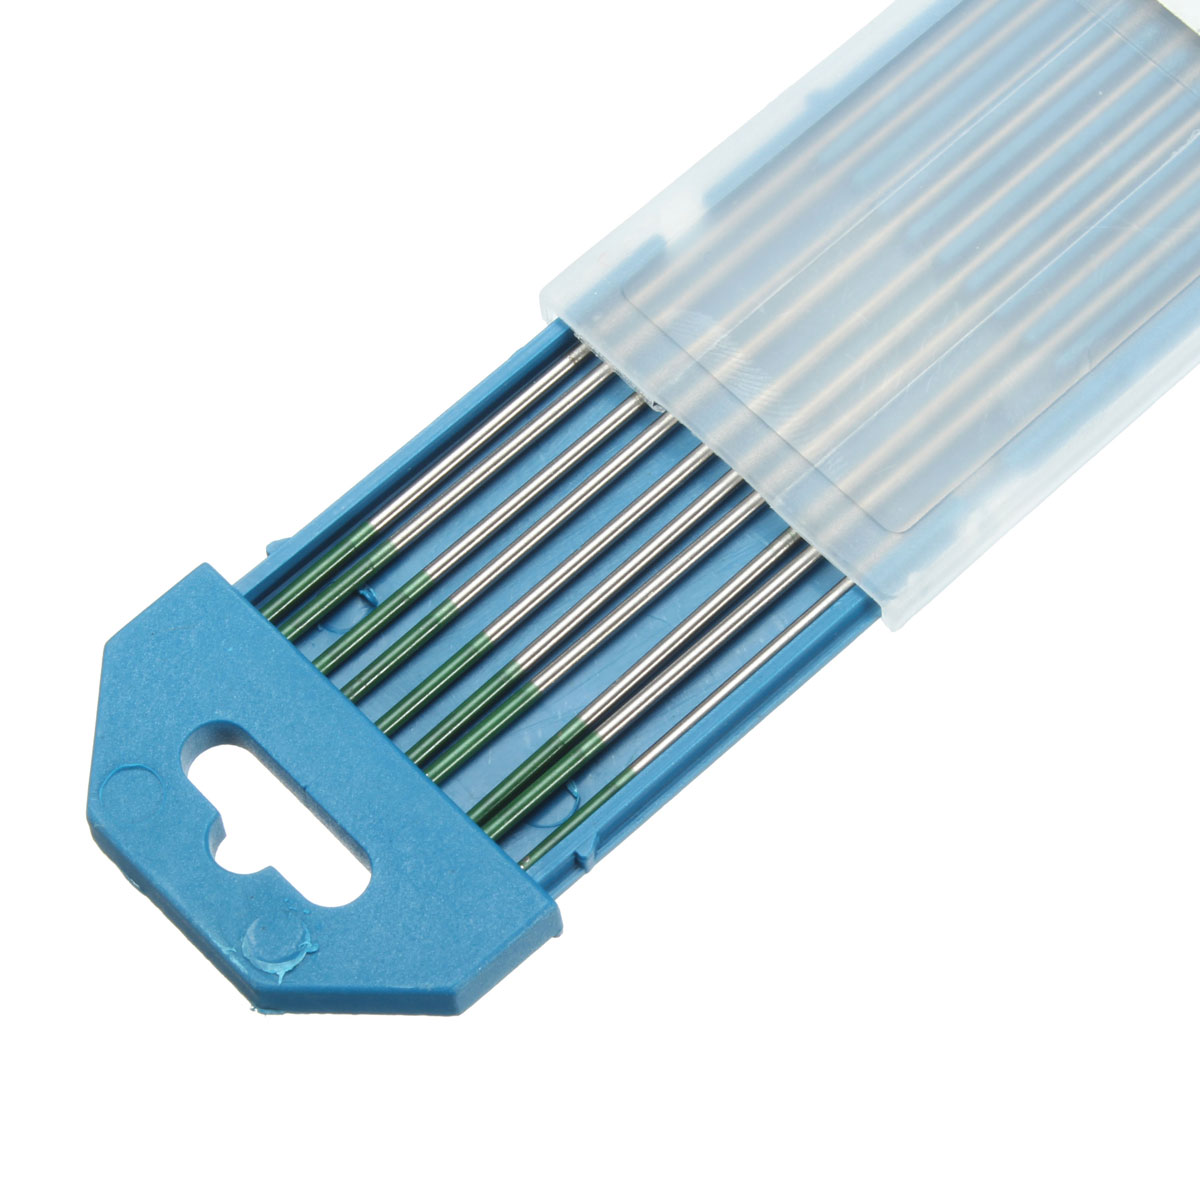 Green-Tip-Pure-Tungsten-Electrode-for-TIG-Welding-10PK--16mm-X-150mm-1056180-2